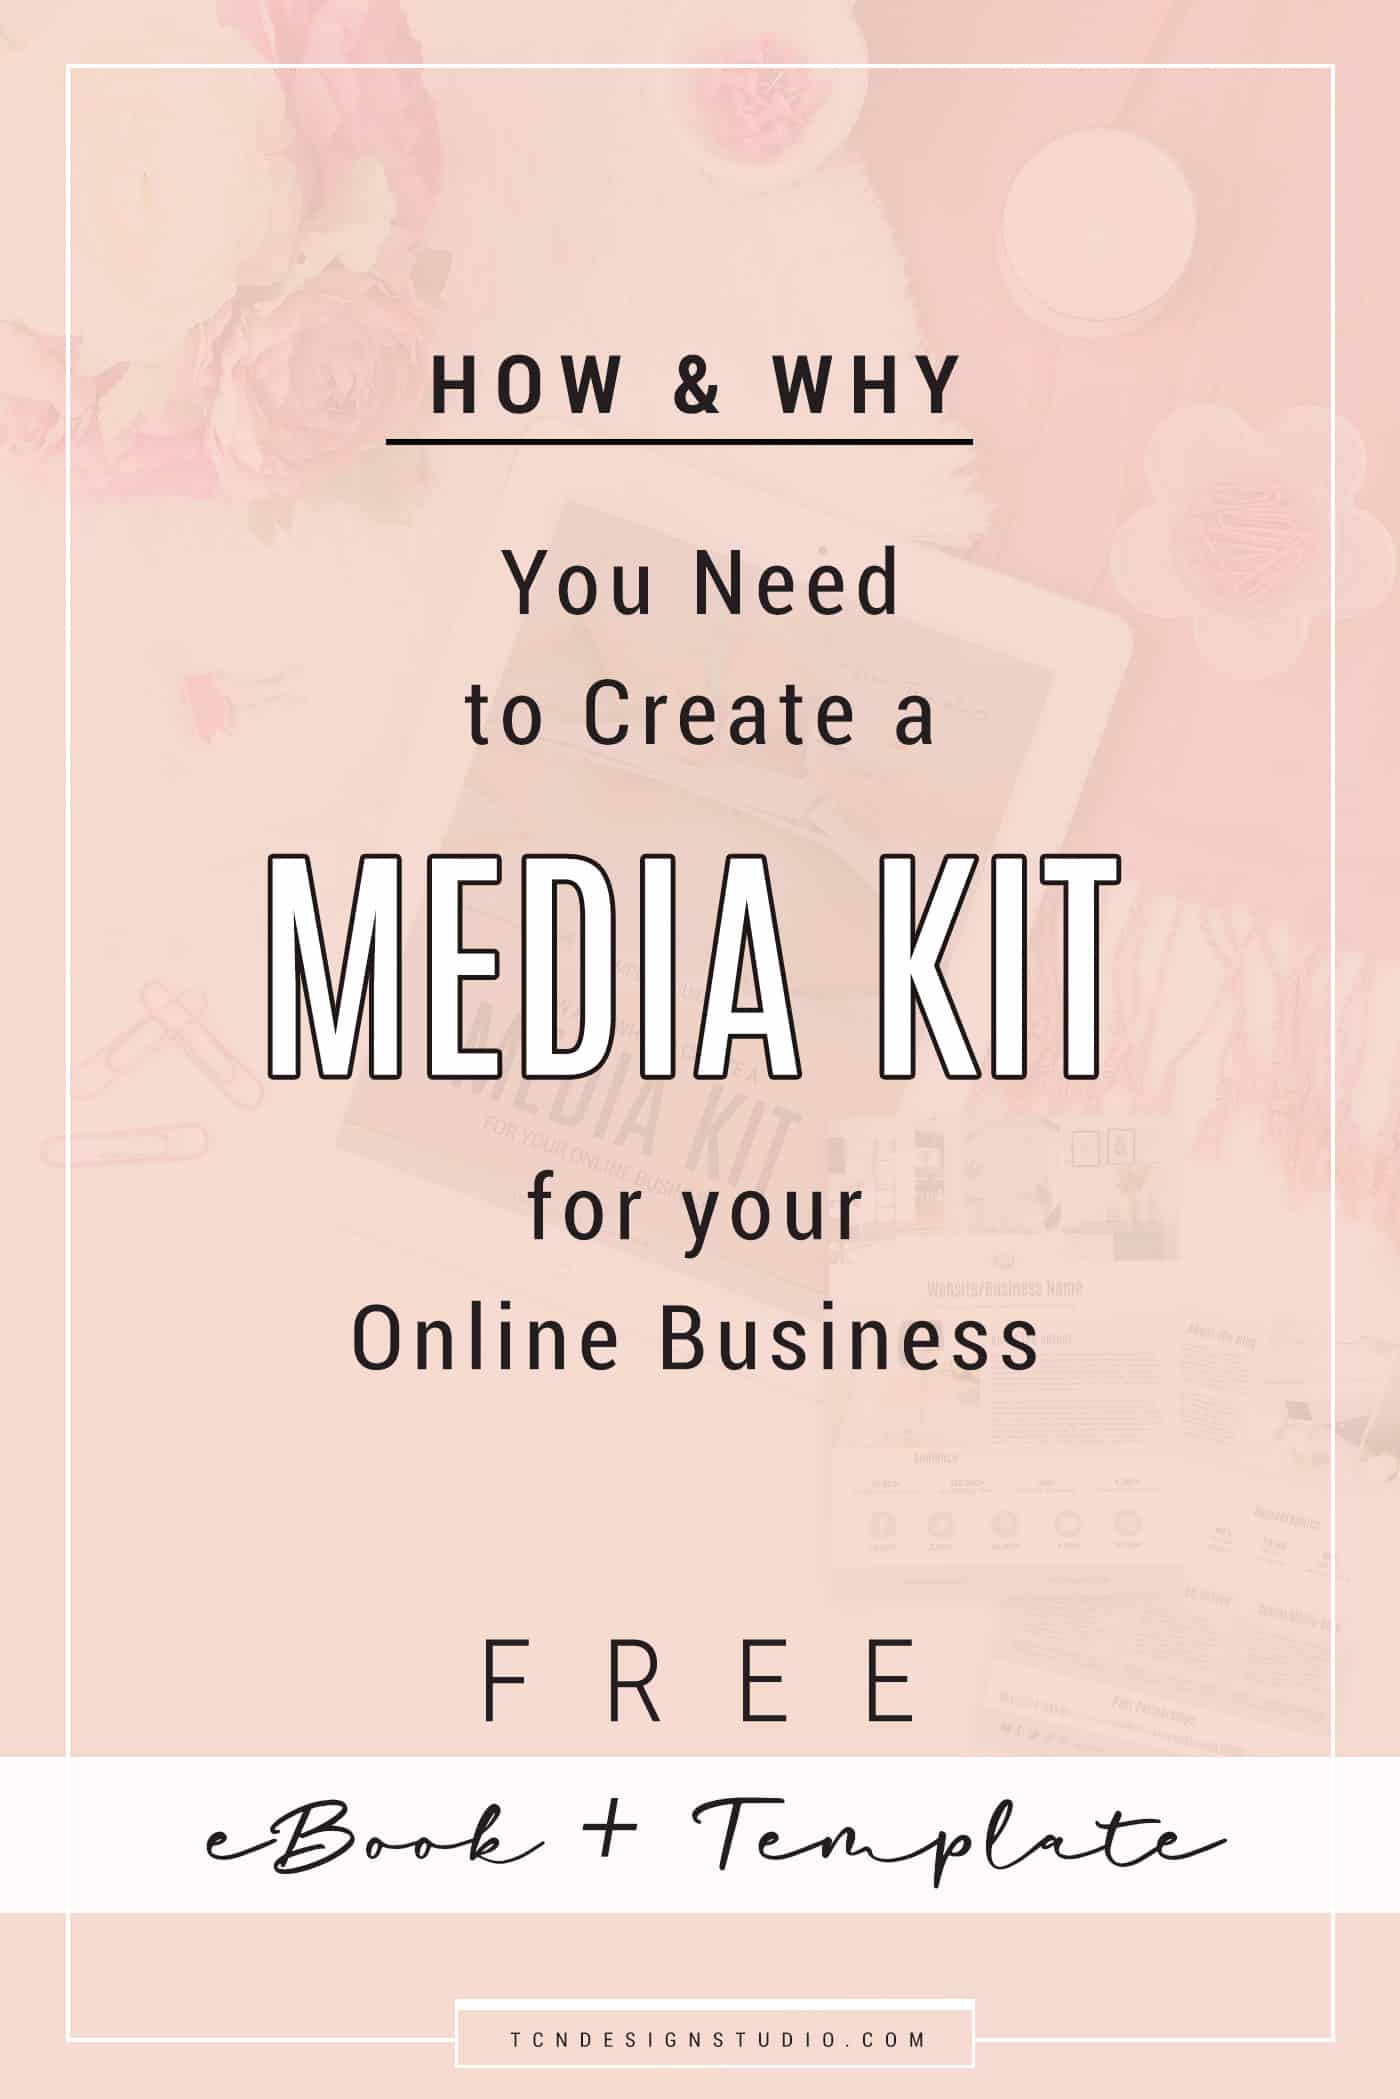 Media Kit: How to Create it and Why it's so Important